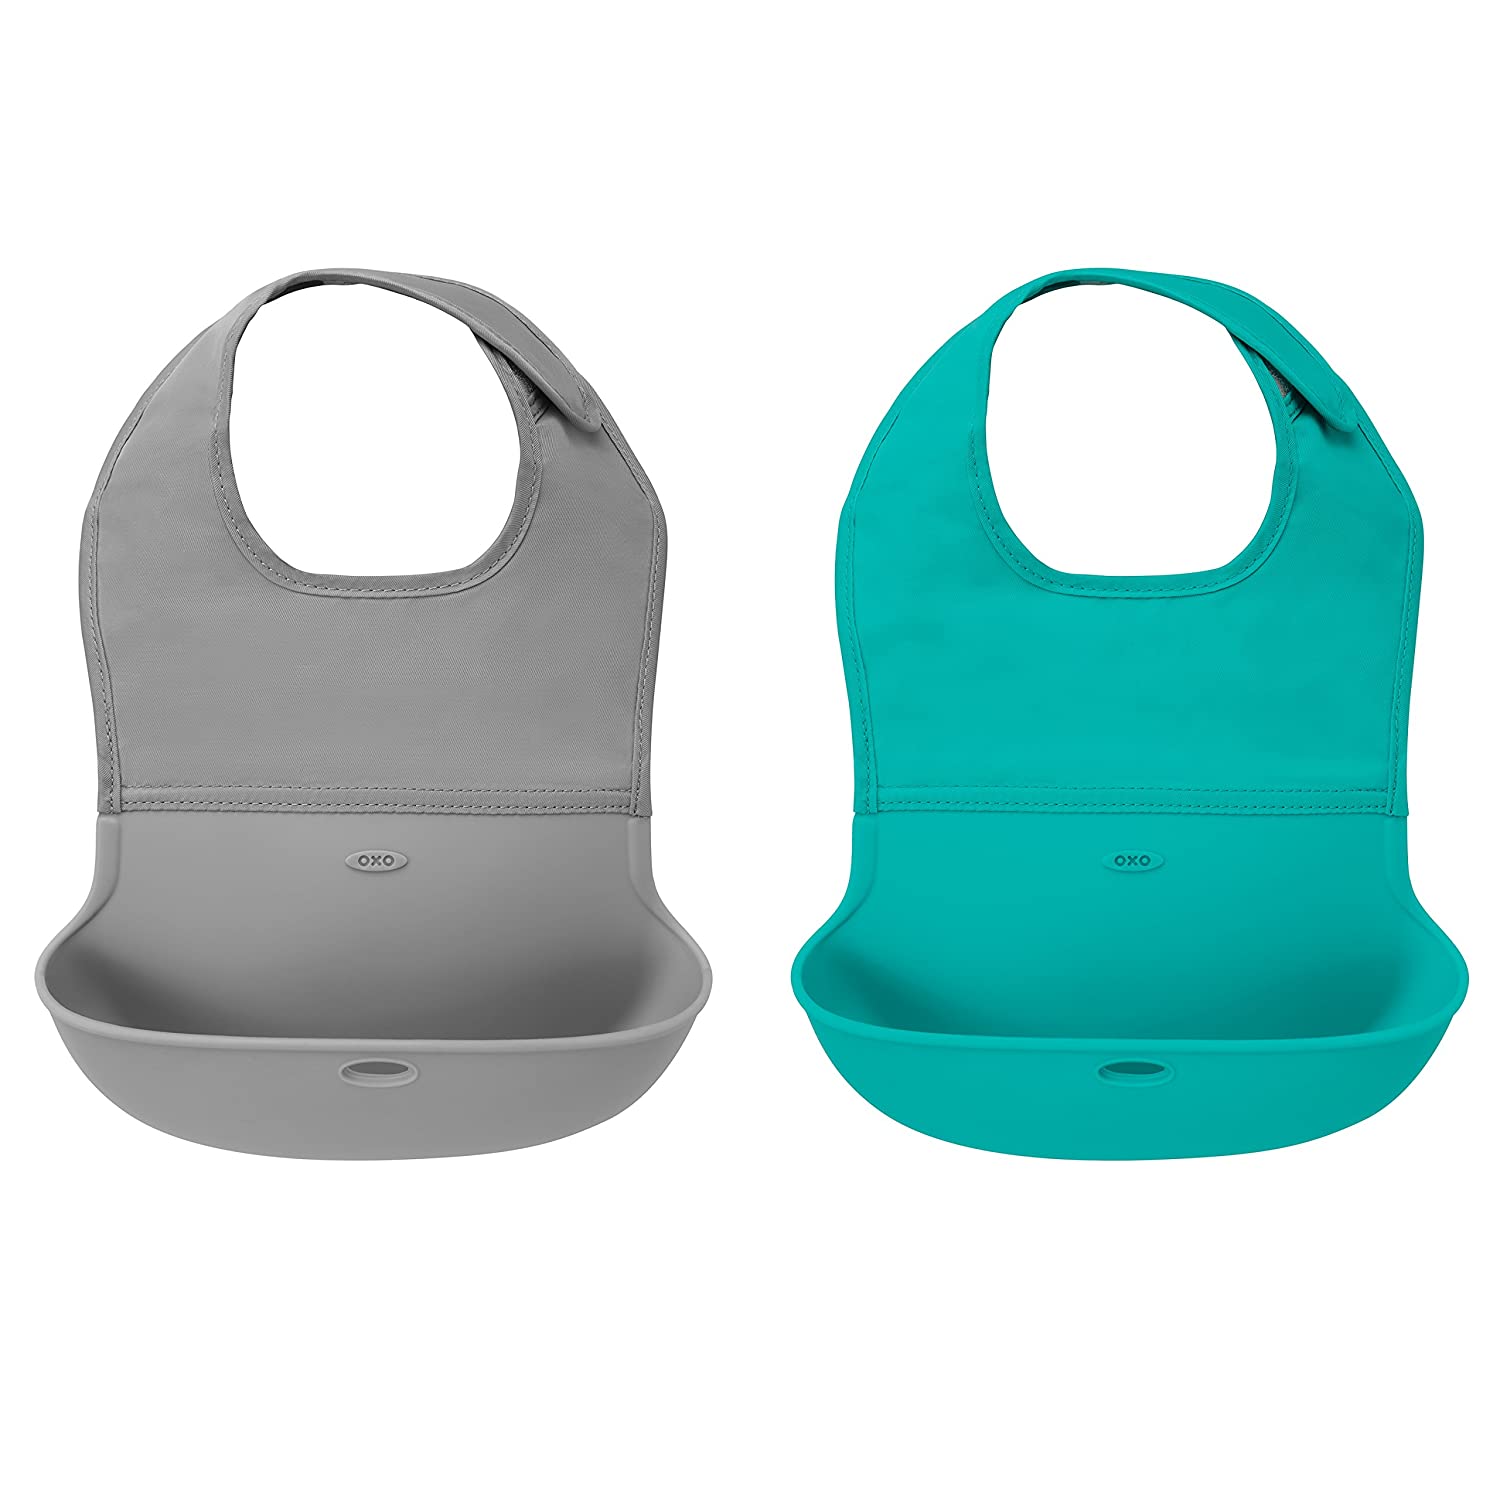 2-Pack OXO Tot Roll- Up Bib (Gray/Teal) $6.29 at Amazon